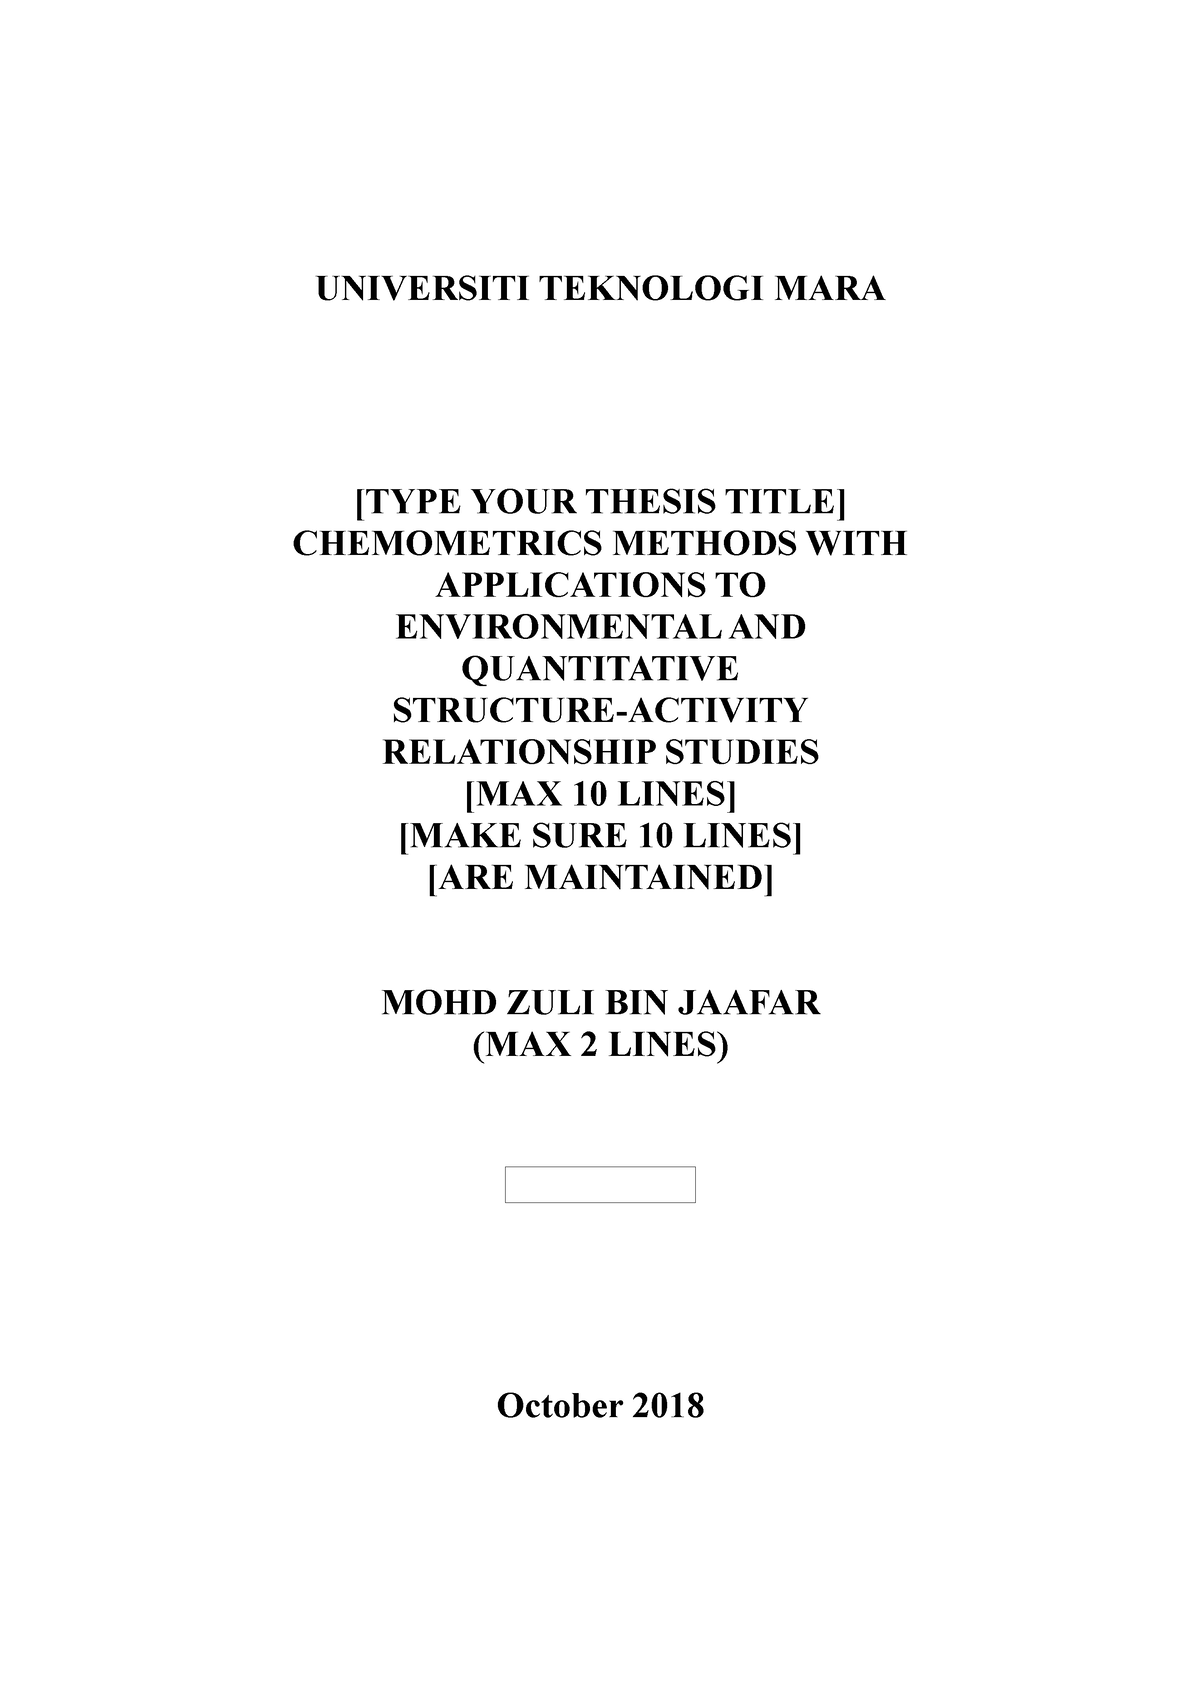 example thesis uitm